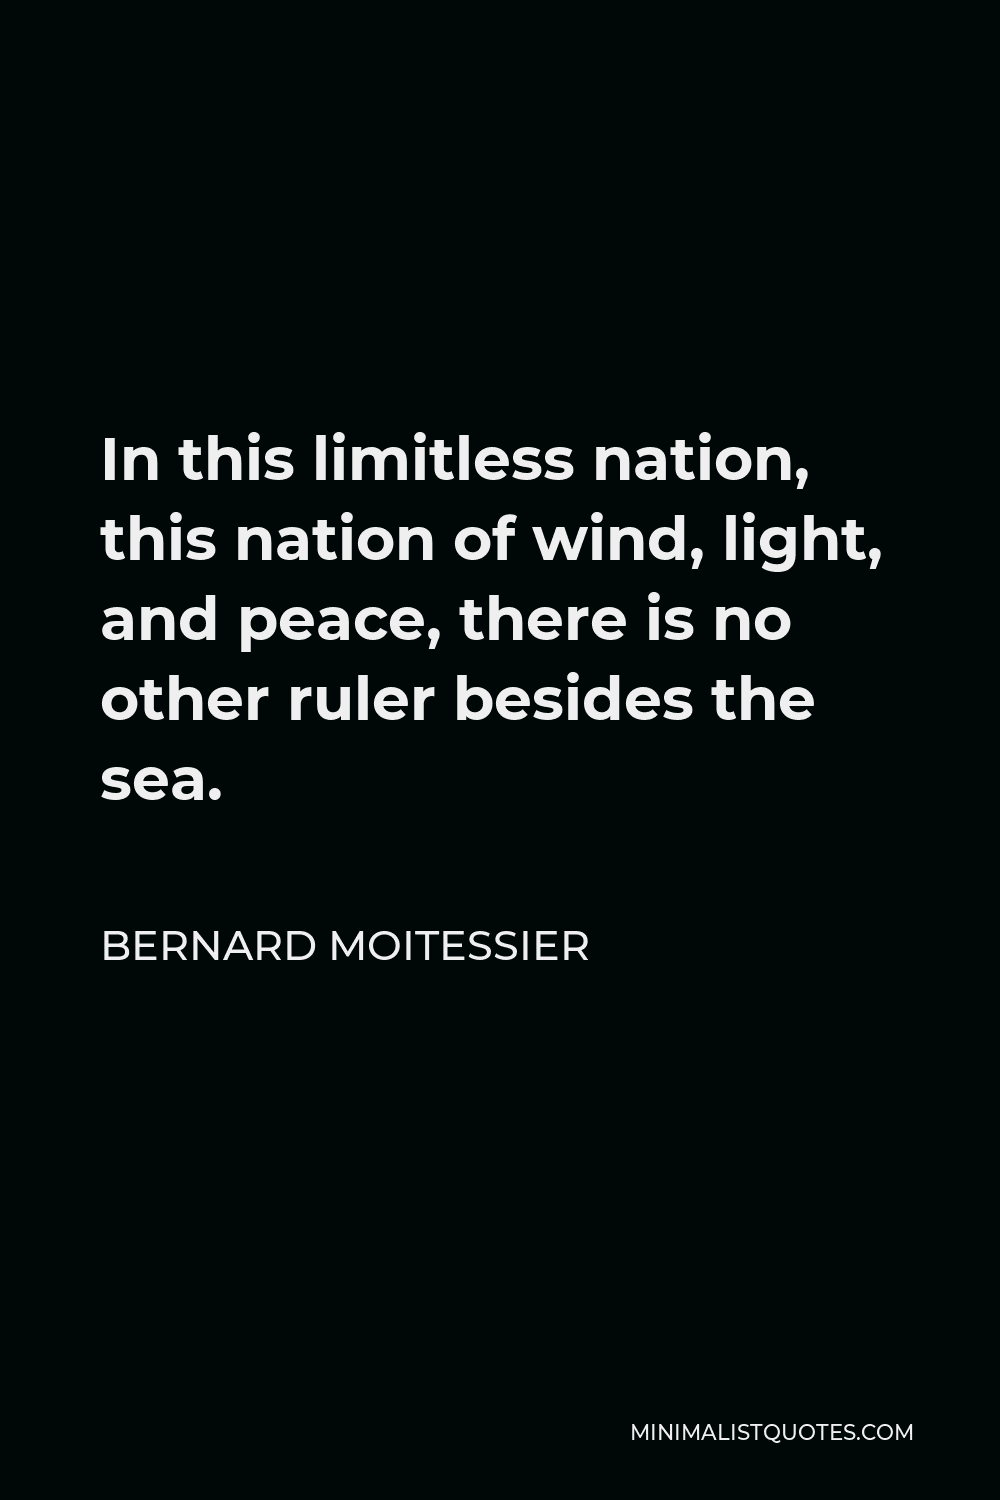 Bernard Moitessier Quote - In this limitless nation, this nation of wind, light, and peace, there is no other ruler besides the sea.